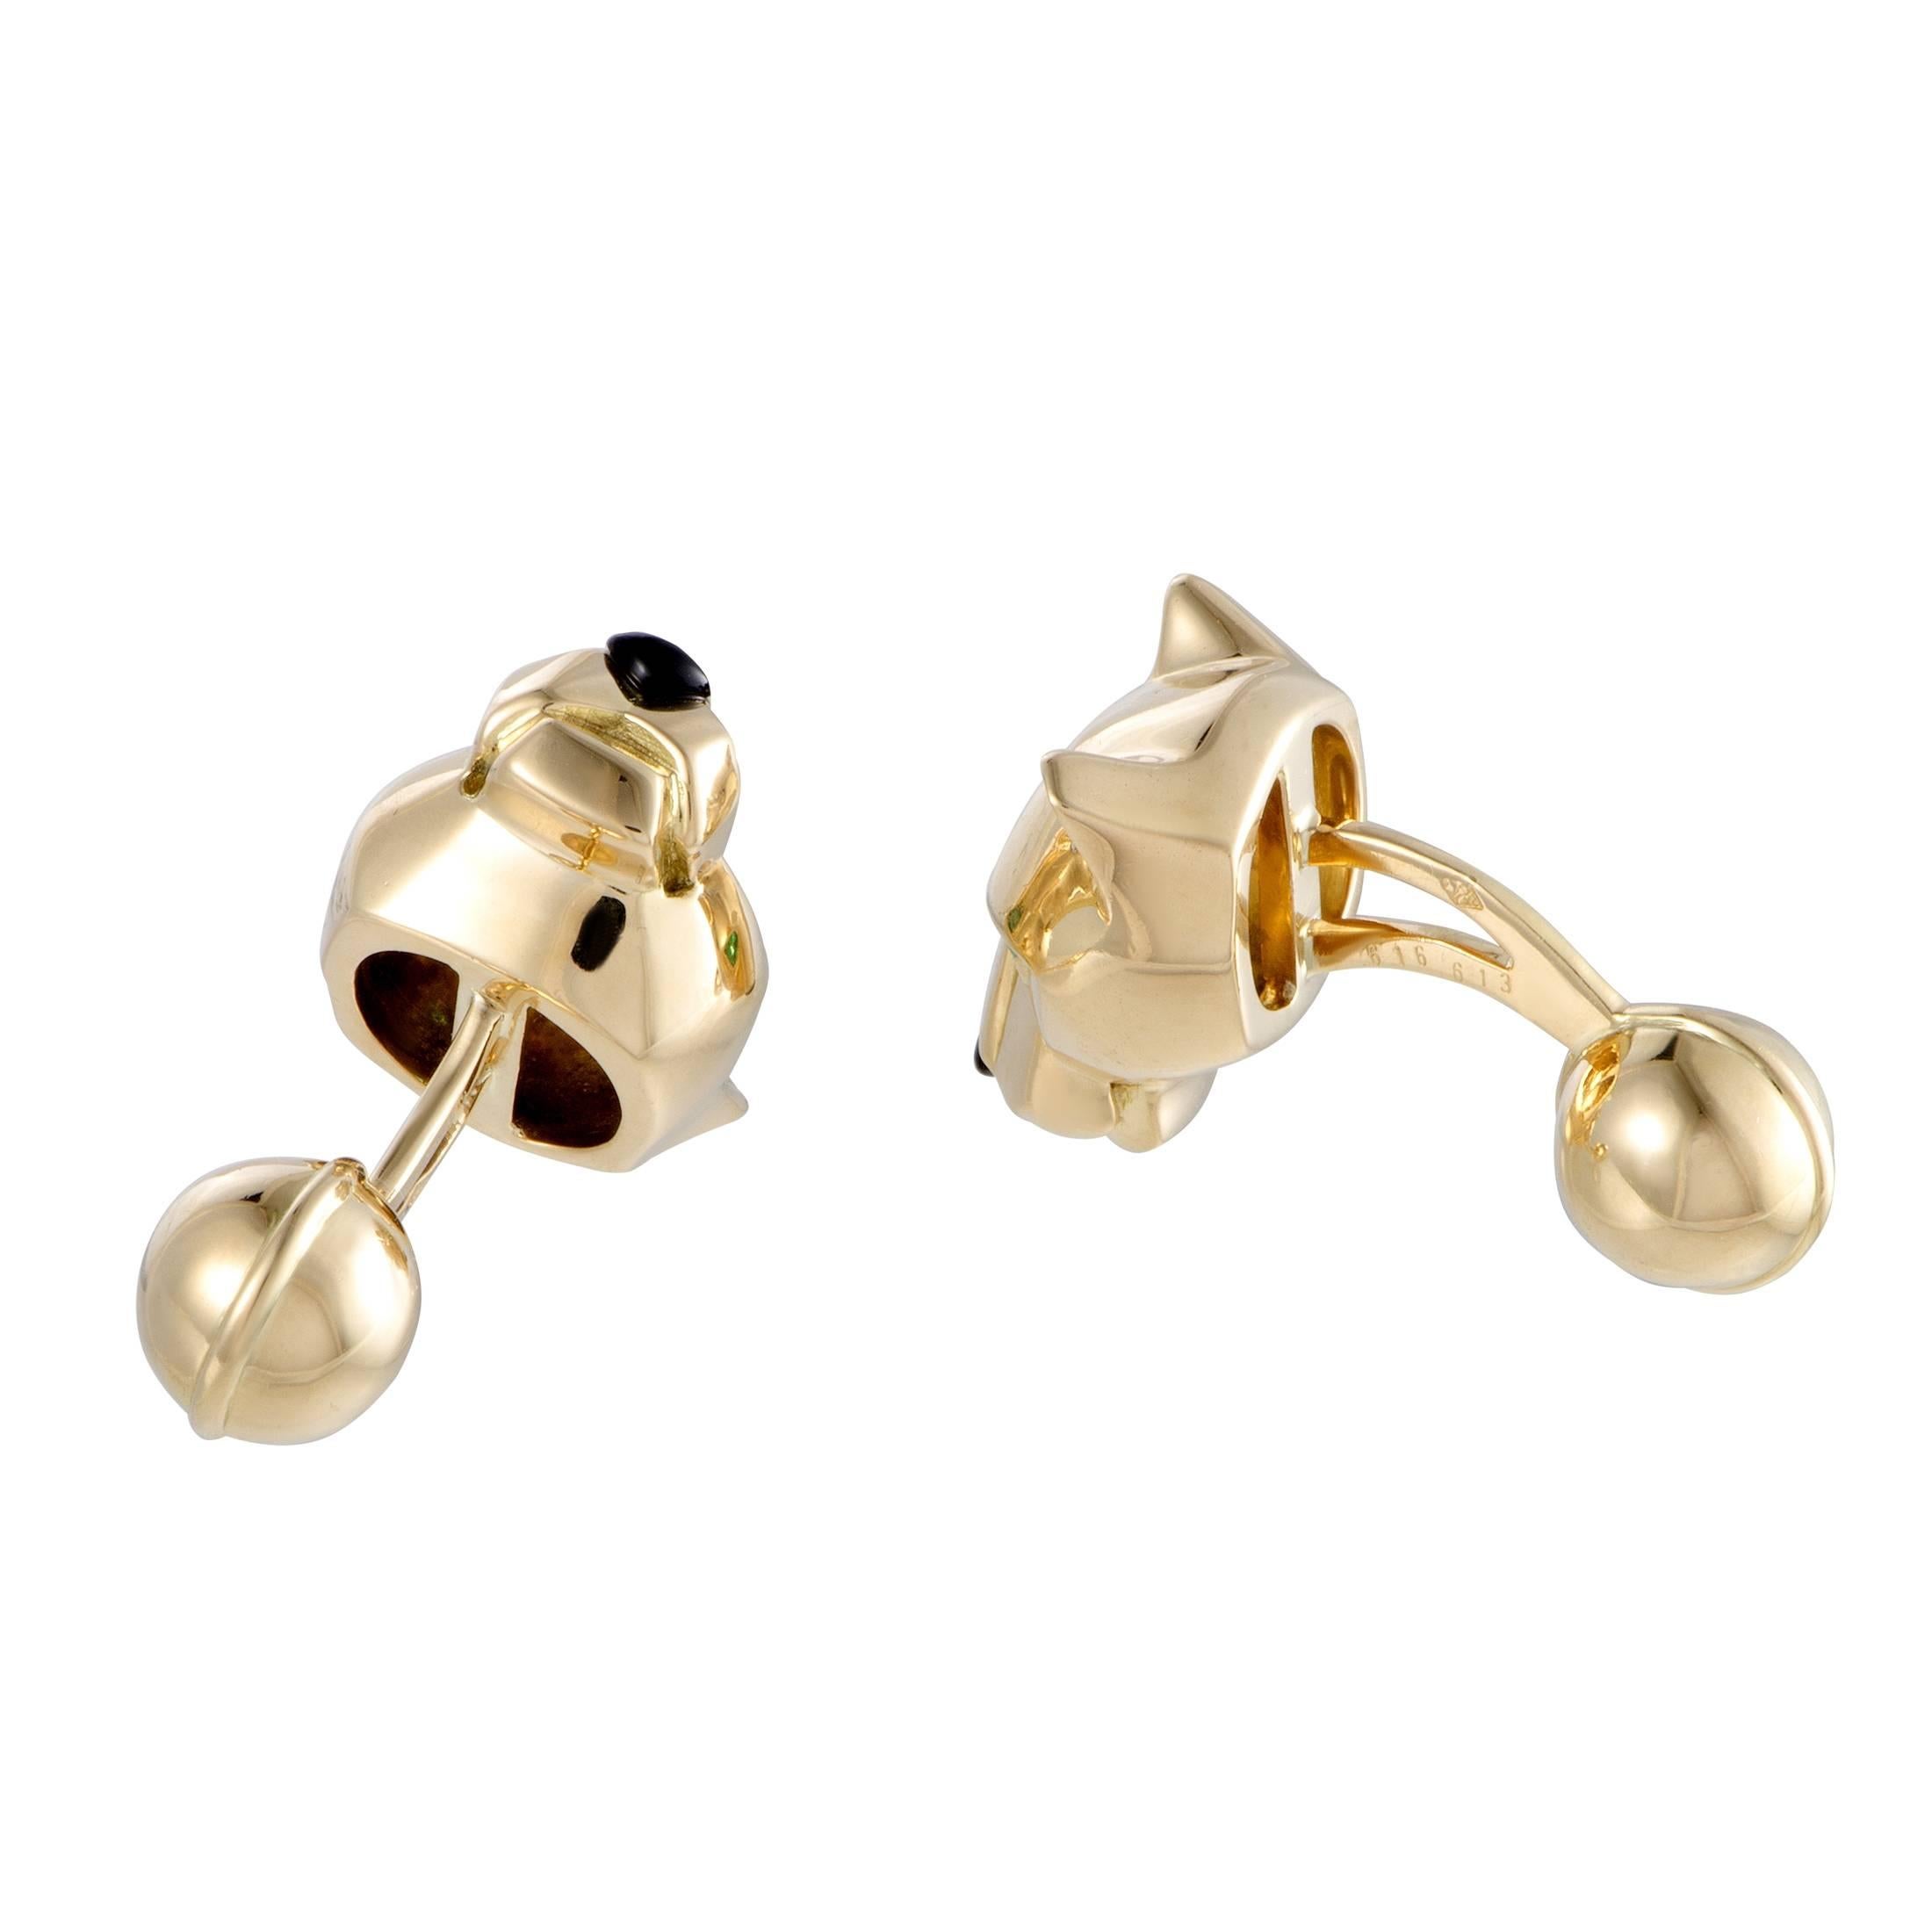 These unique panthere cufflinks by Cartier are elegantly designed in shimmering 18K yellow gold. The classy cufflinks boast a nifty charming appeal with the addition of glamorous onyx and captivating tsavorite stones in its remarkable design.